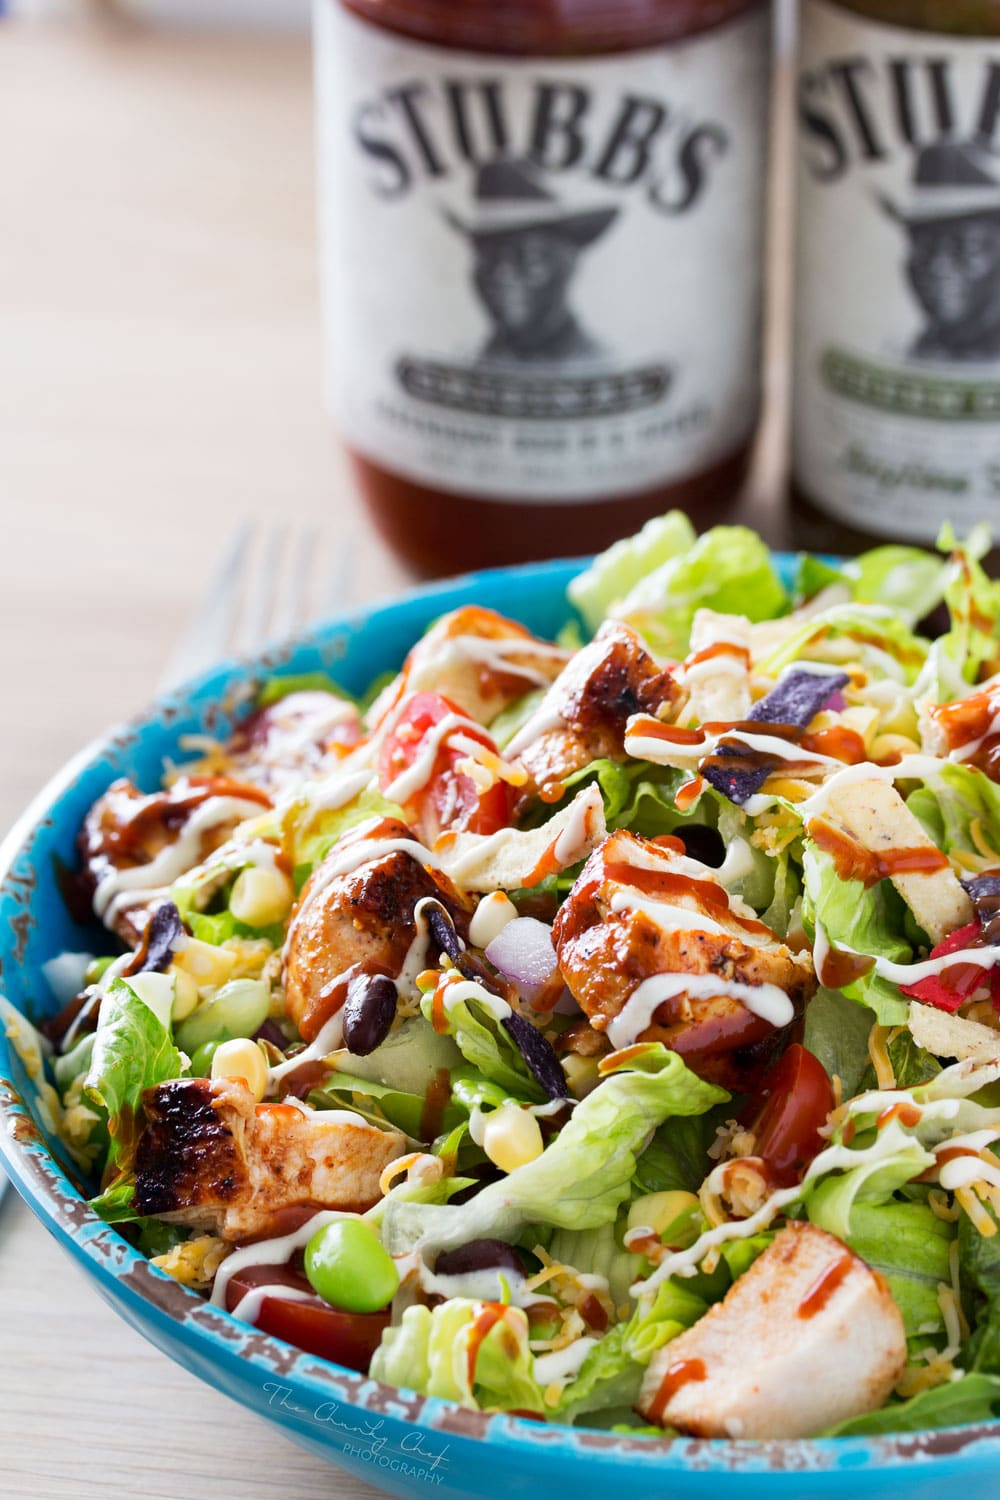 BBQ Chicken Salad | This fresh and crisp bbq chicken salad is packed with veggies, tender grilled chicken, and topped with bbq sauce and a green chile ranch dressing! | http://thechunkychef.com